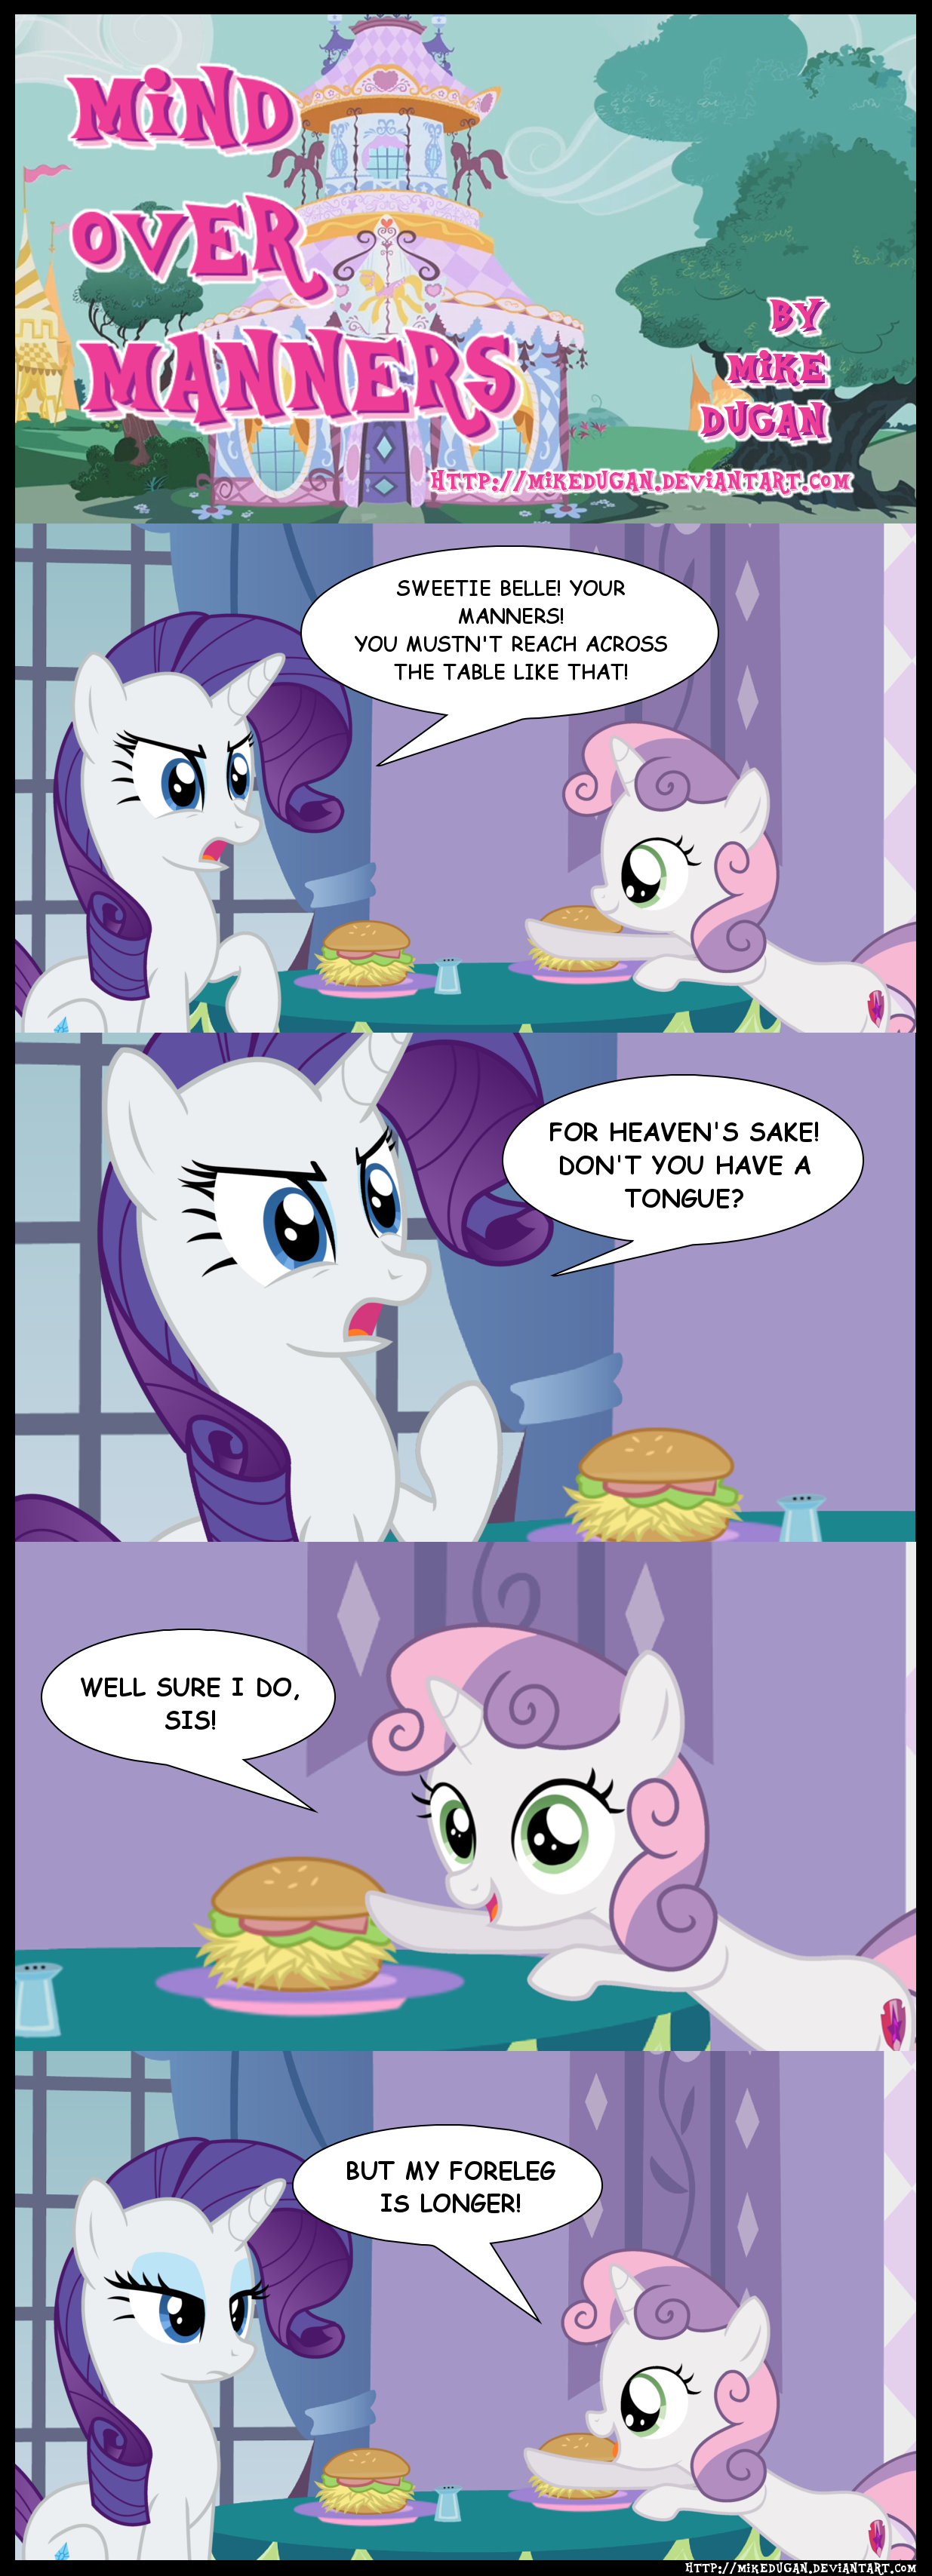 [Obrázek: mlp_comic___mind_over_manners_by_mikedugan-dakkkw9.png]